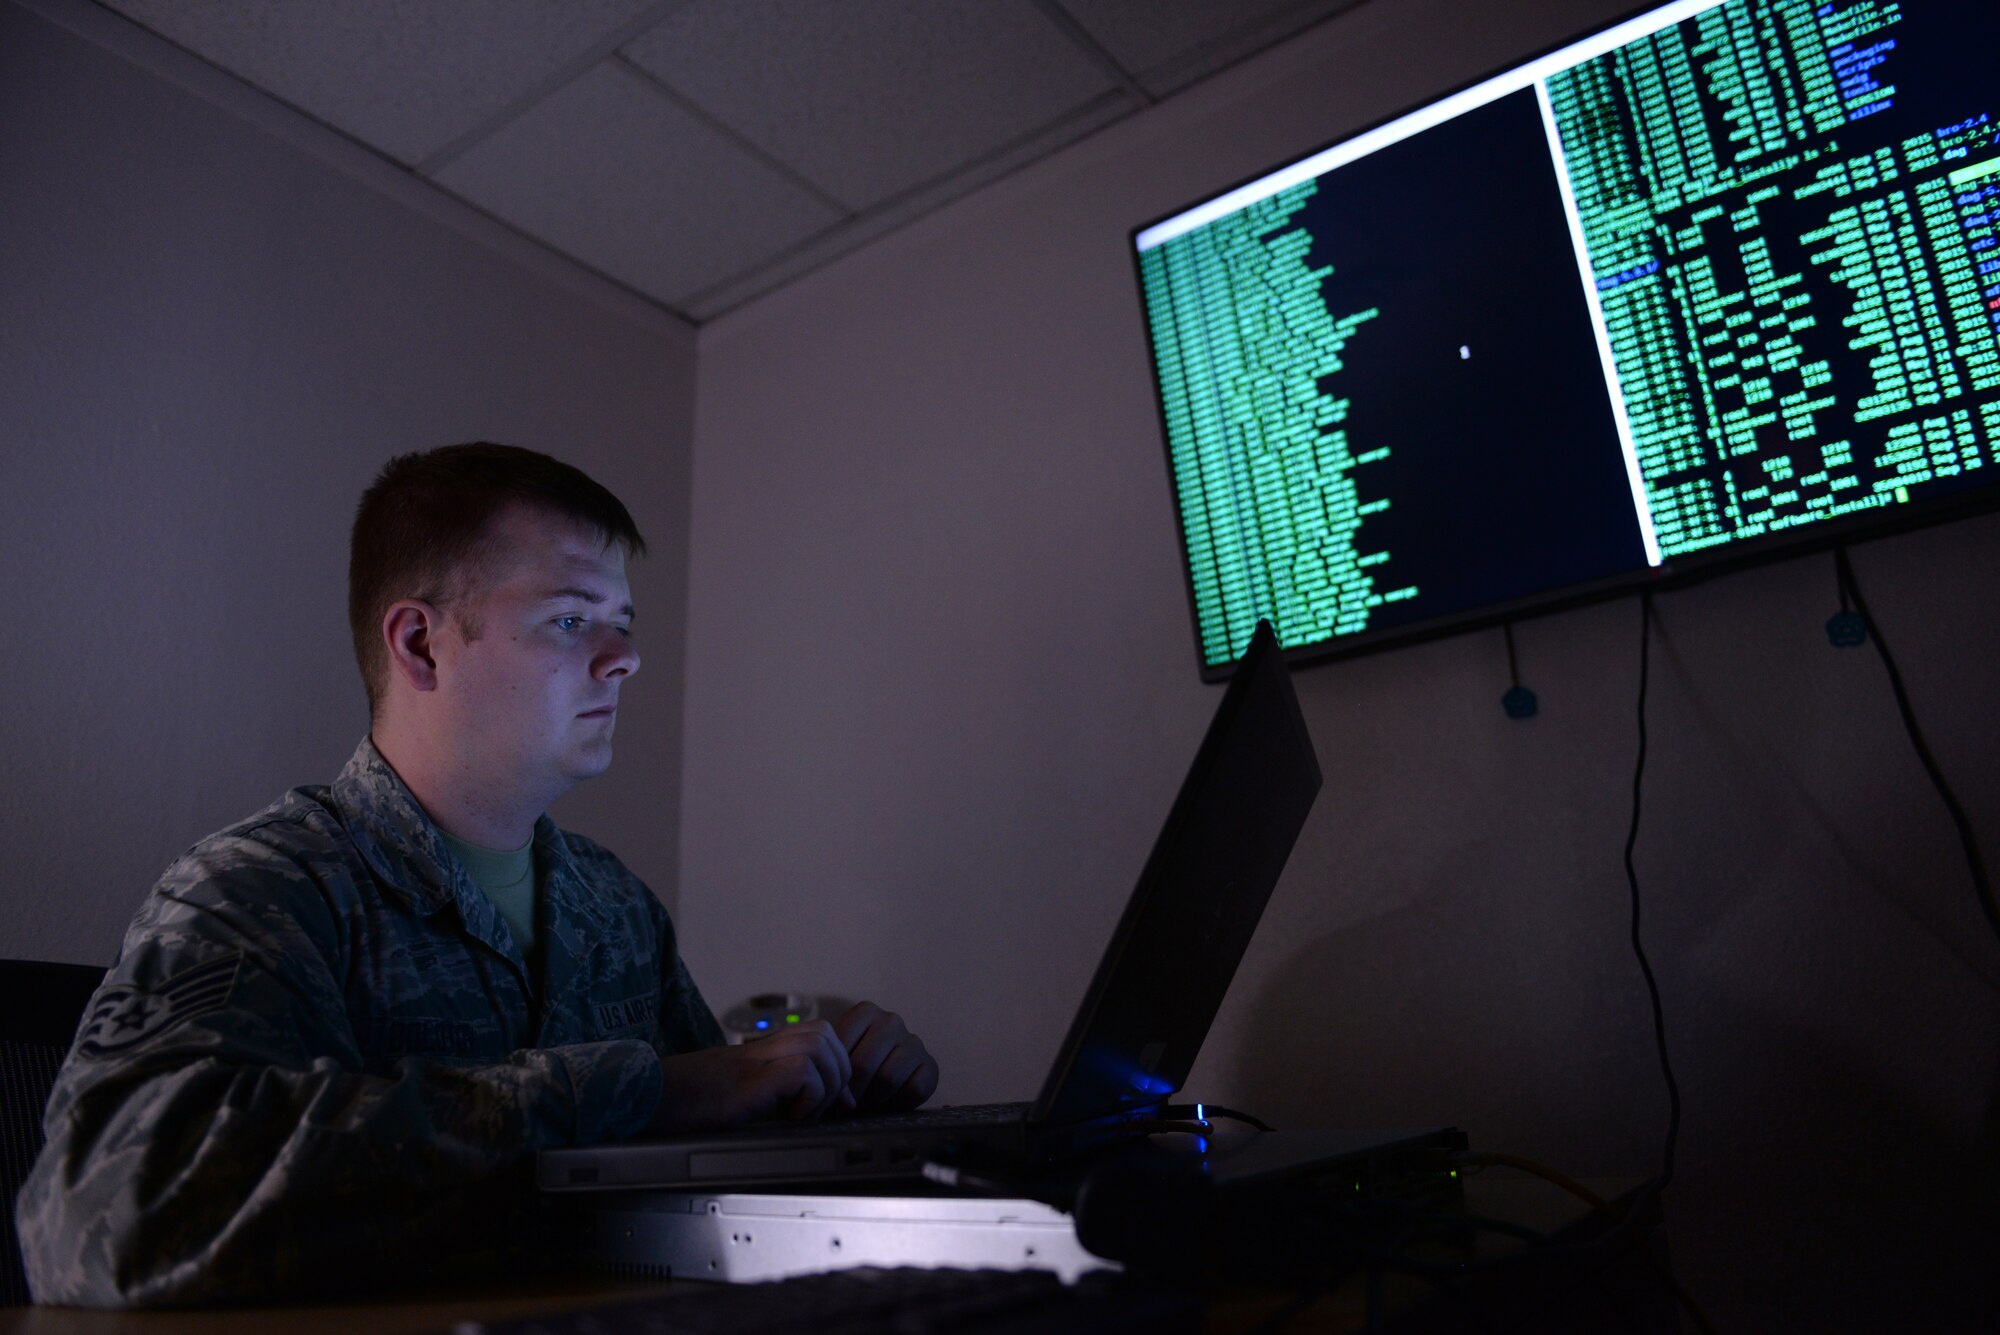 Staff Sgt. Yaroslav Bolotov, 56th Communications Squadron Mission Defense Team operator, monitors base network activity July 10, 2018, at Luke Air Force Base, Ariz. The MDT is a team of communications and cyber warfare specialists who provide active cyber security for base assets. (U.S. Air Force photo by Senior Airman Ridge Shan)